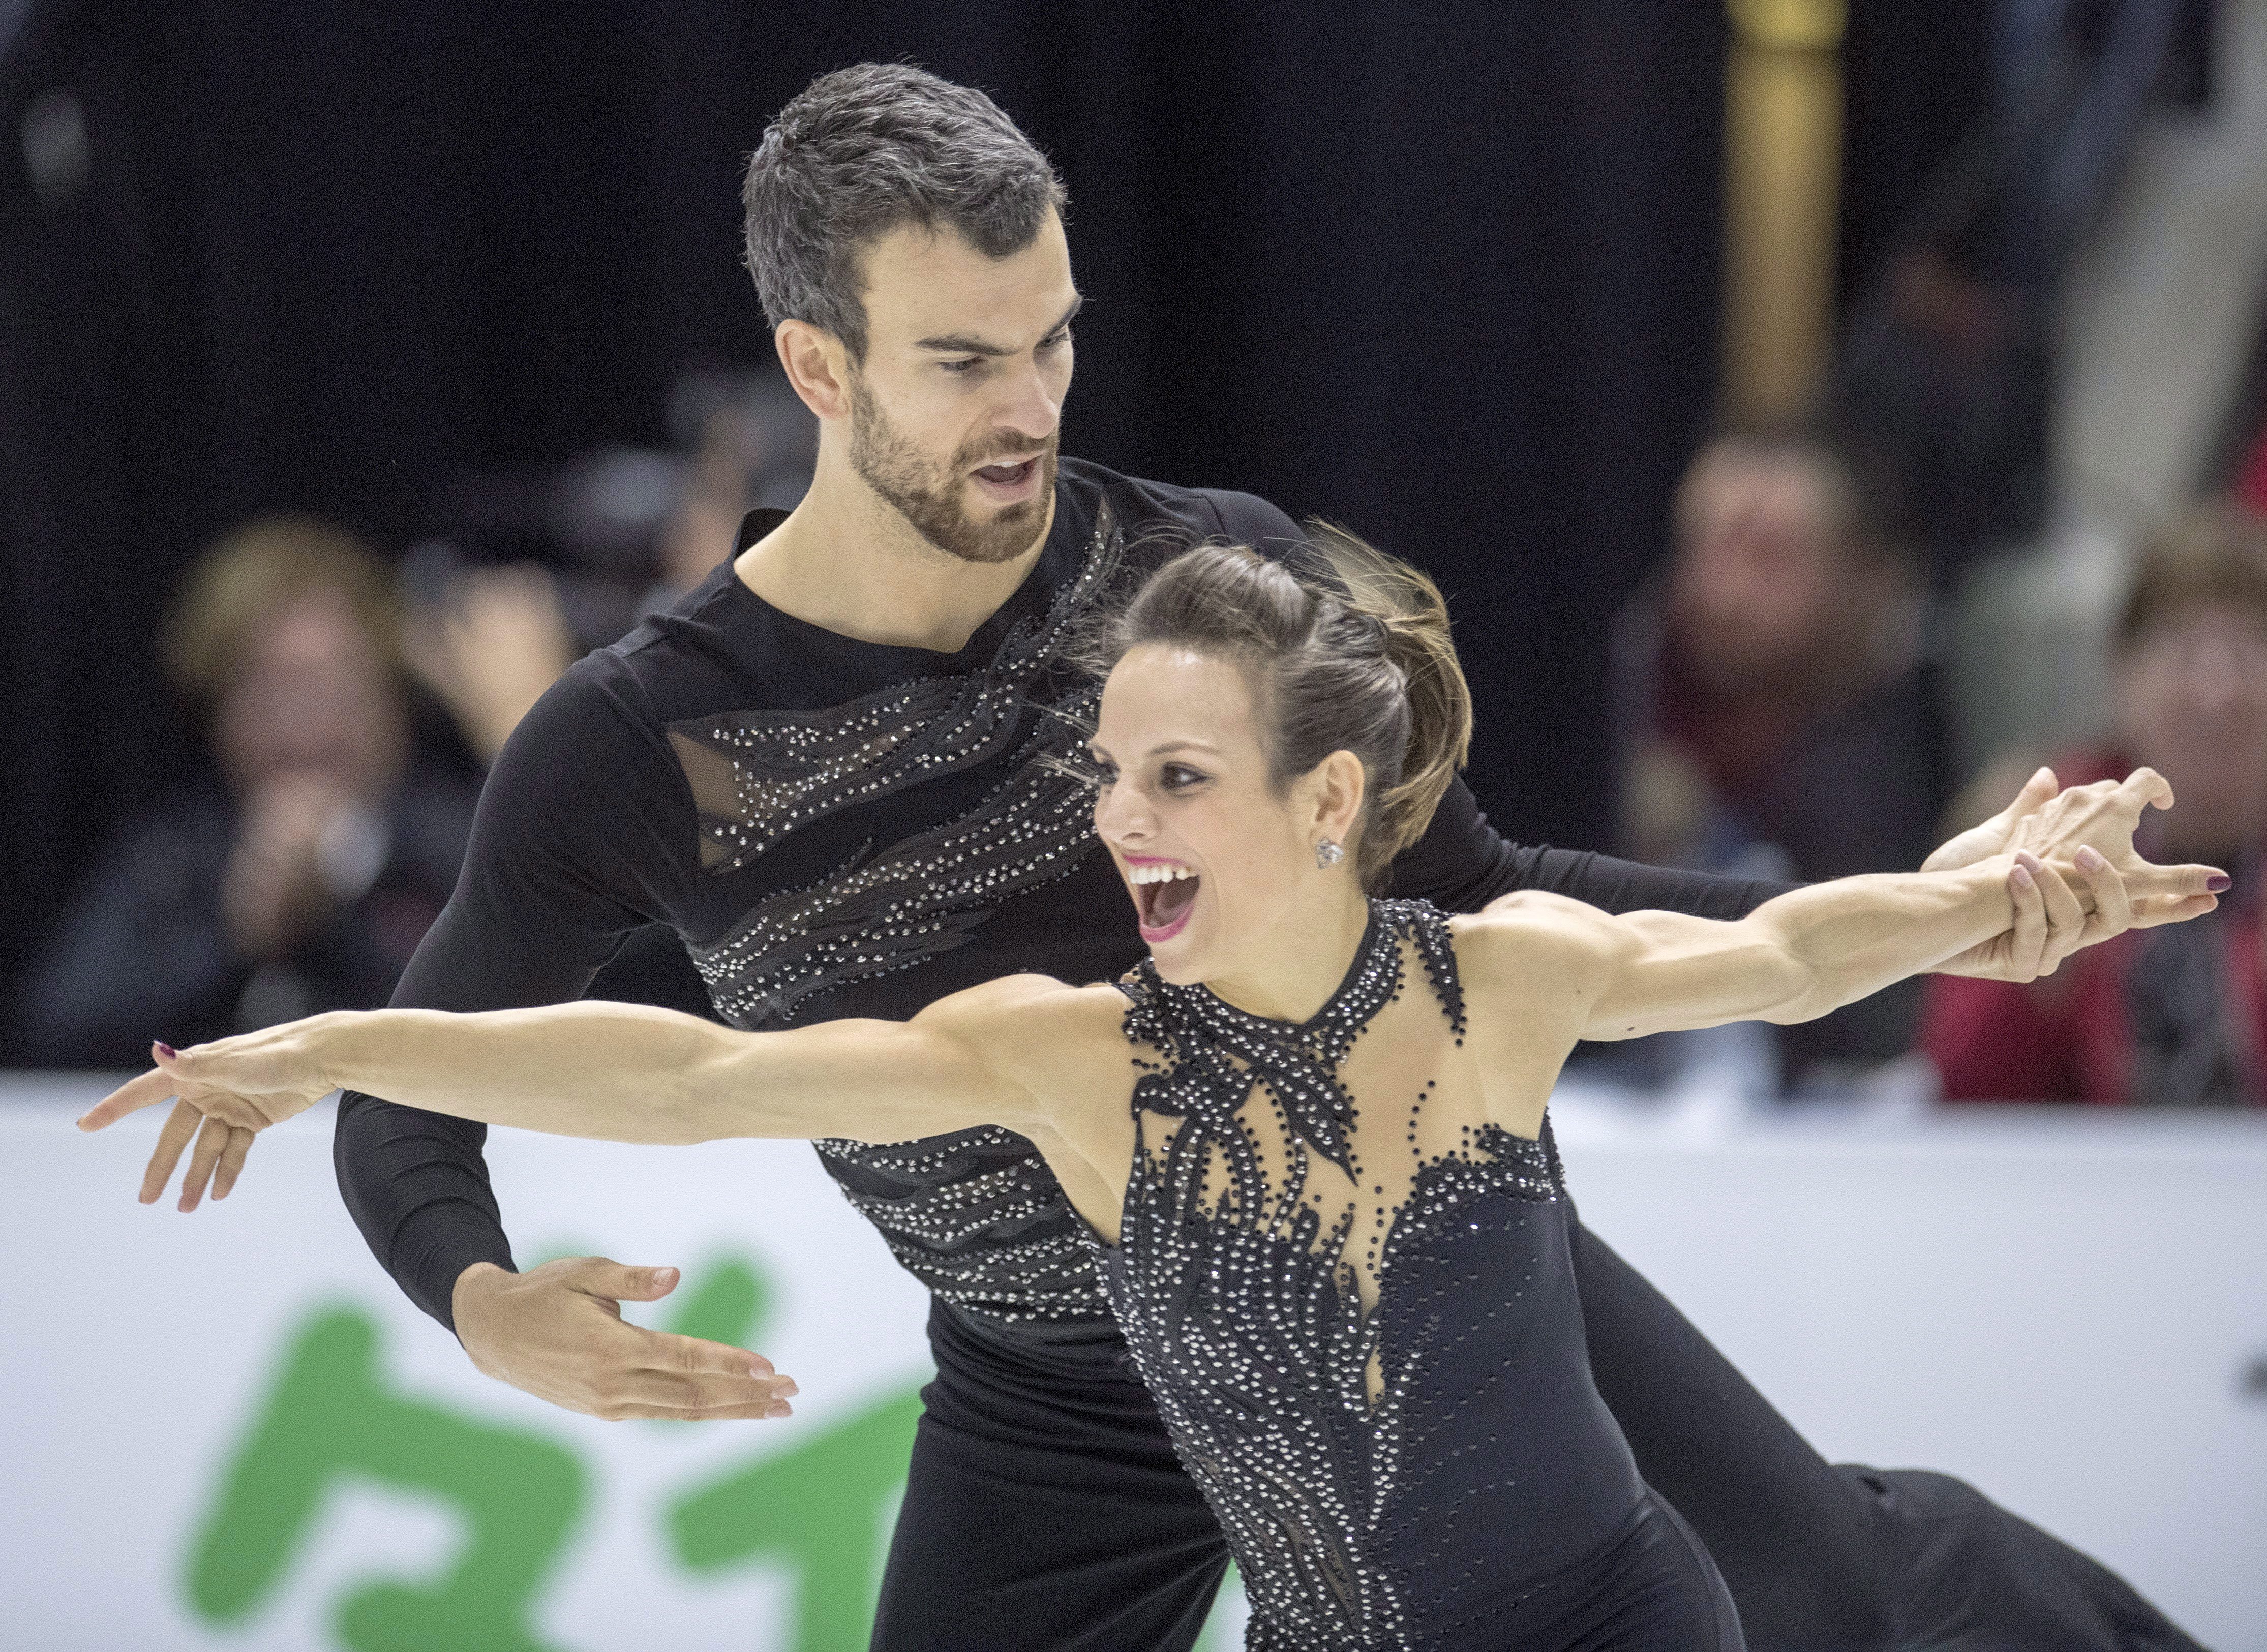 Canada's Meagan Duhamel and Eric Radford perform in the pairs short program at Skate Canada International Friday, October 28, 2016 in Mississauga, Ont. THE CANADIAN PRESS/Frank Gunn